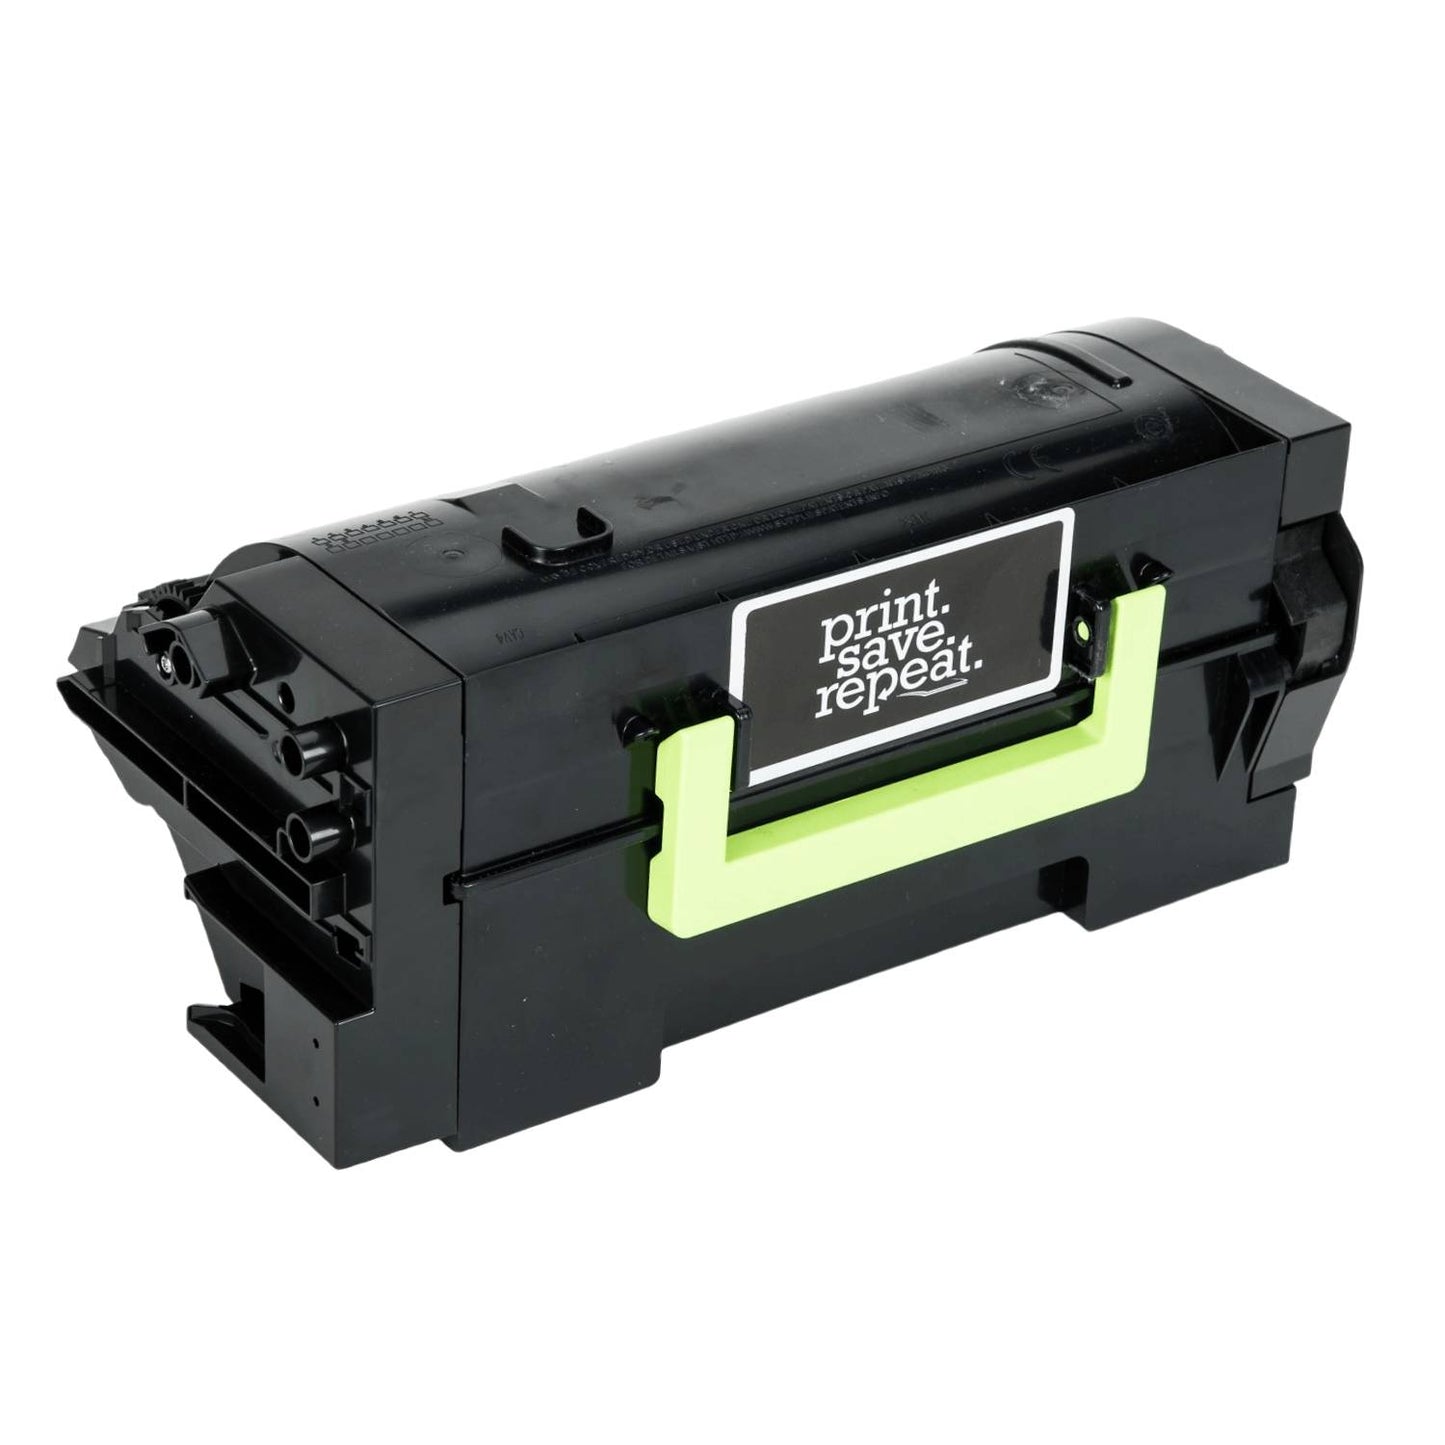 Print.Save.Repeat. Lexmark 58D1U00 Ultra High Yield Remanufactured Toner Cartridge for MS725, MS823, MS824, MS825, MS826, MX722, MX725, MX822, MX824, MX826 [55,000 Pages]